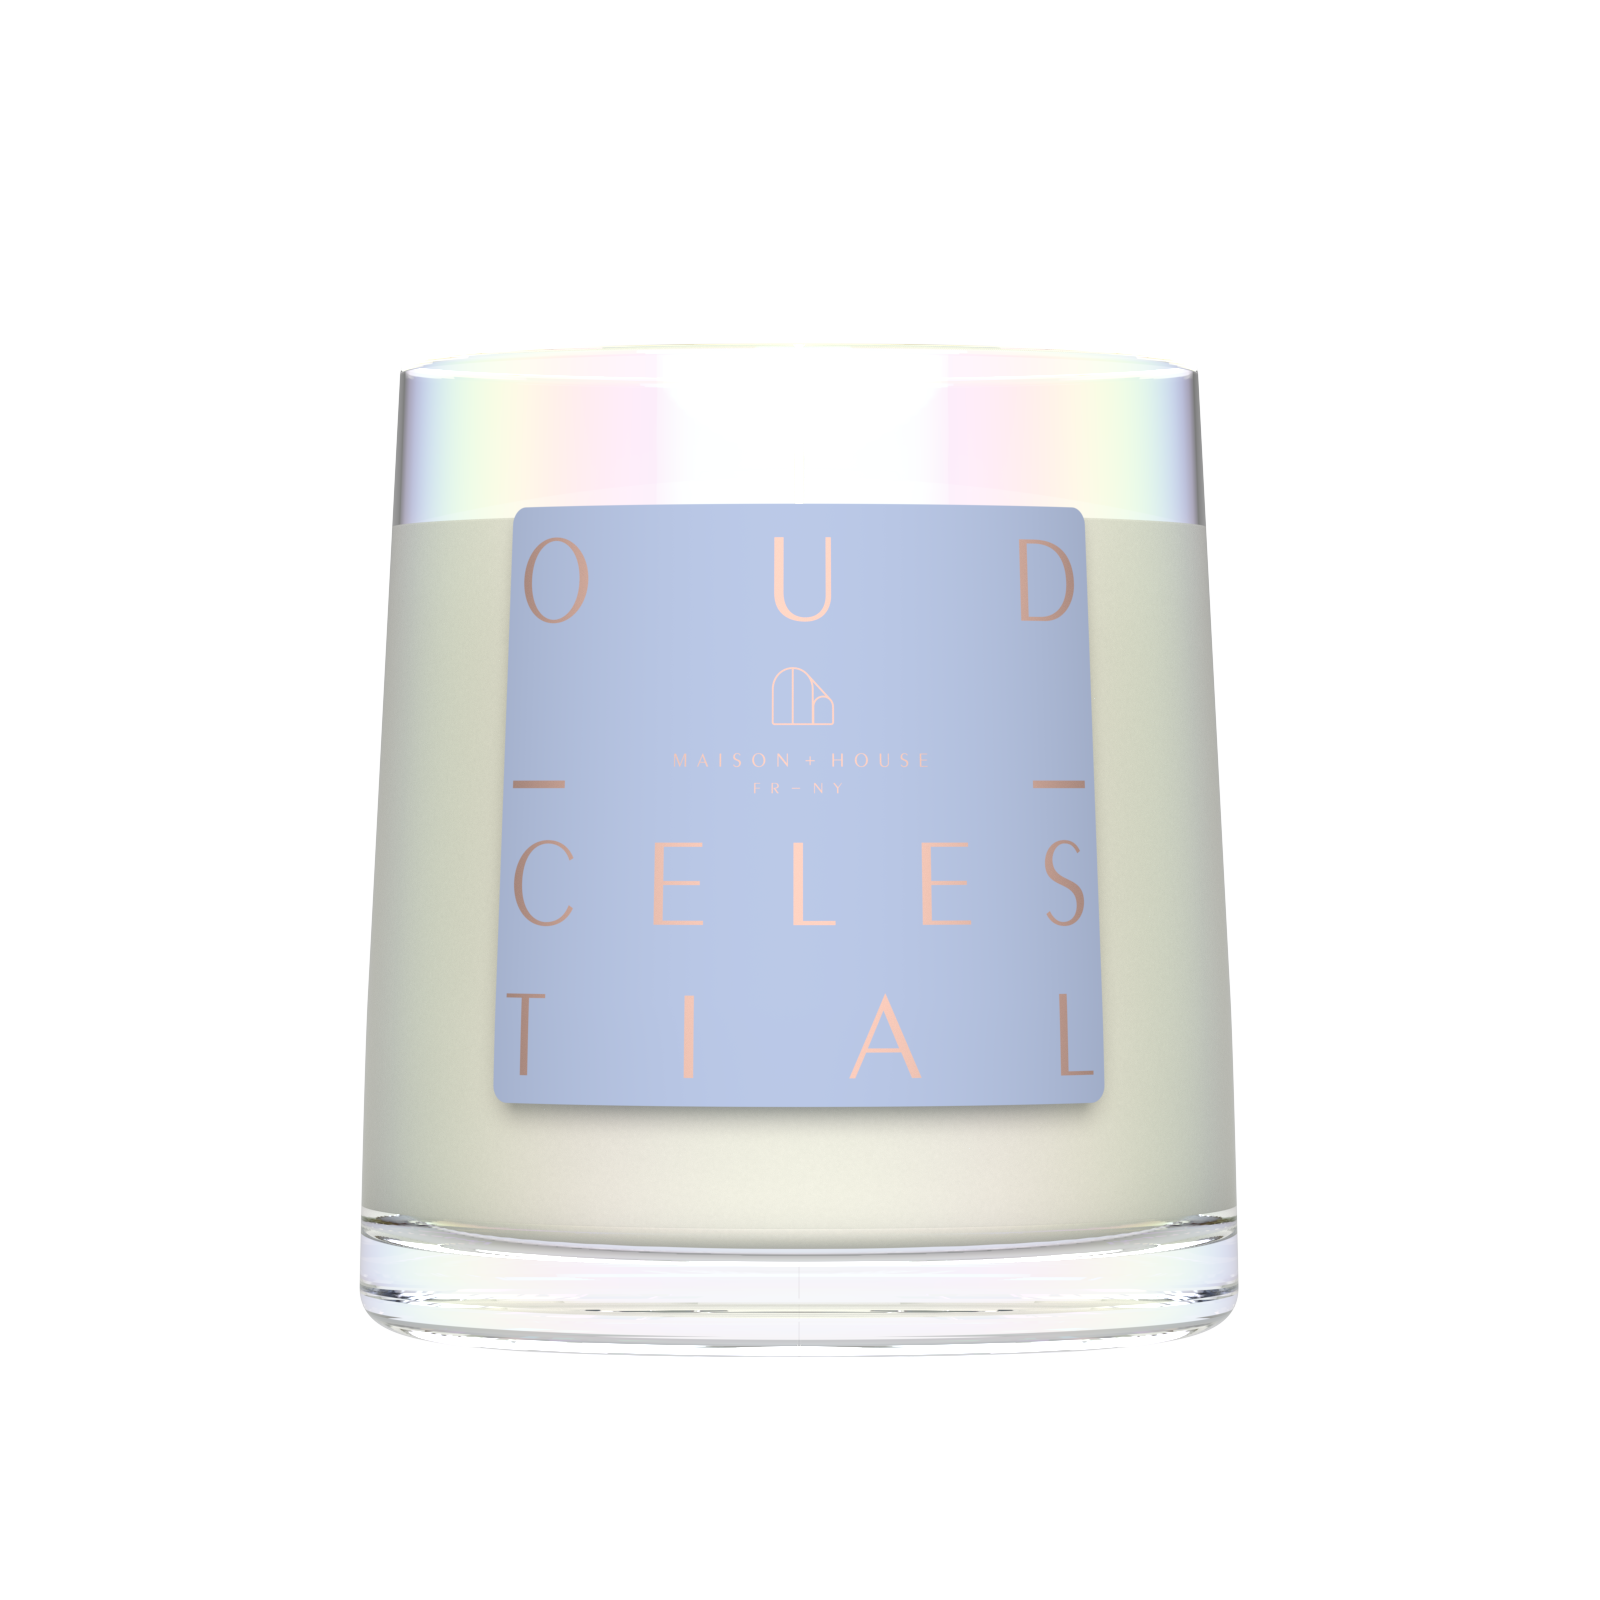 Oud Celestial Artisanal French-Fragrance Candle